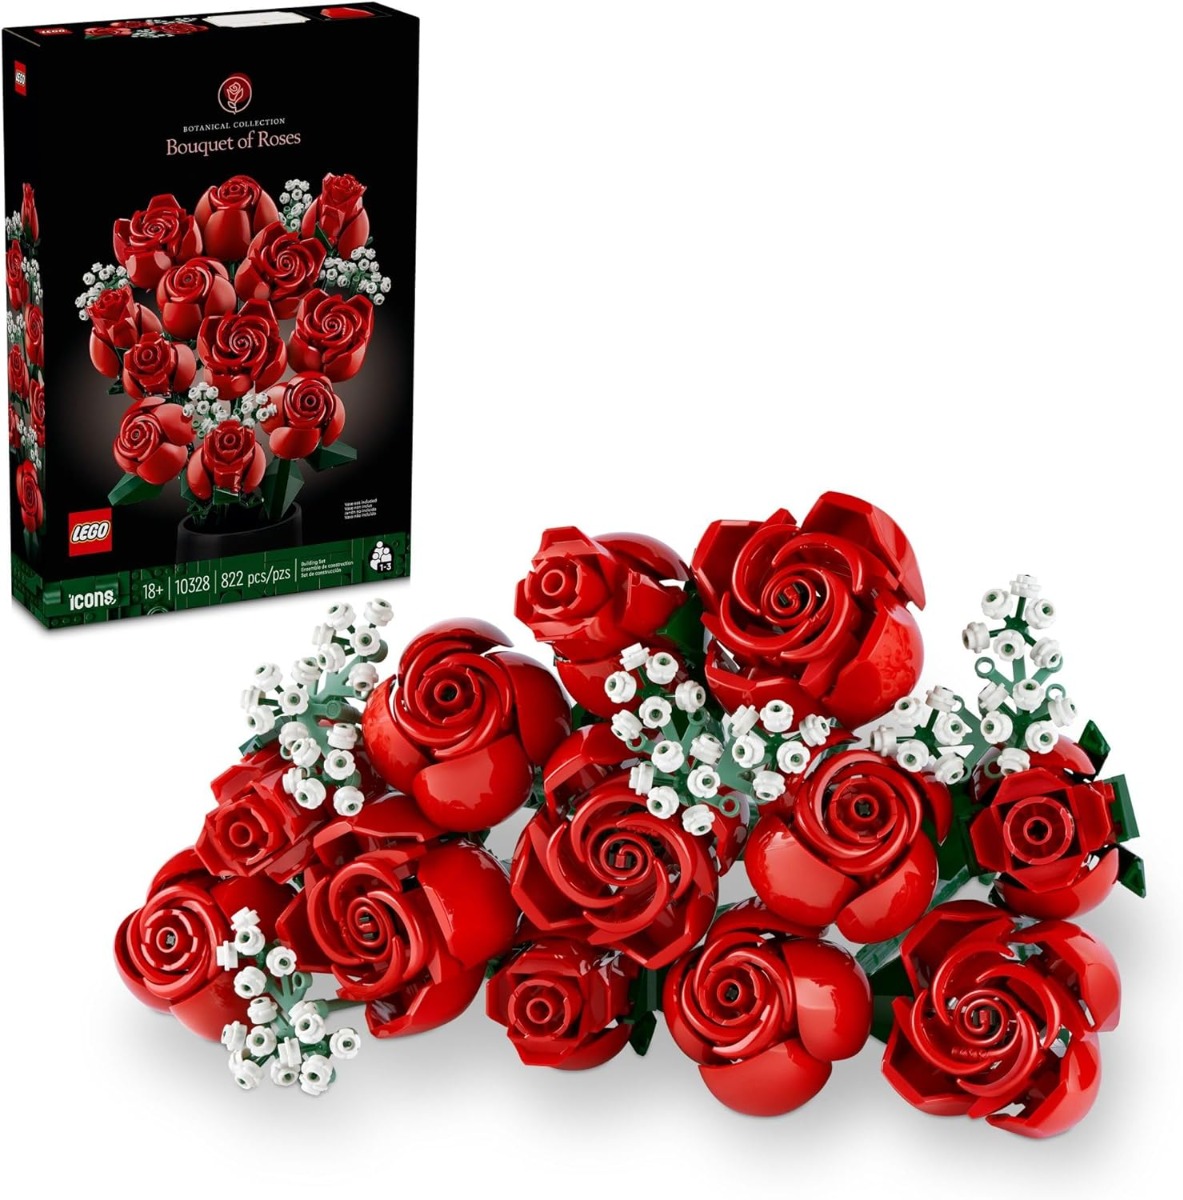 LEGO Botanical Collection Bouquet of Roses (10328), 822 Pieces